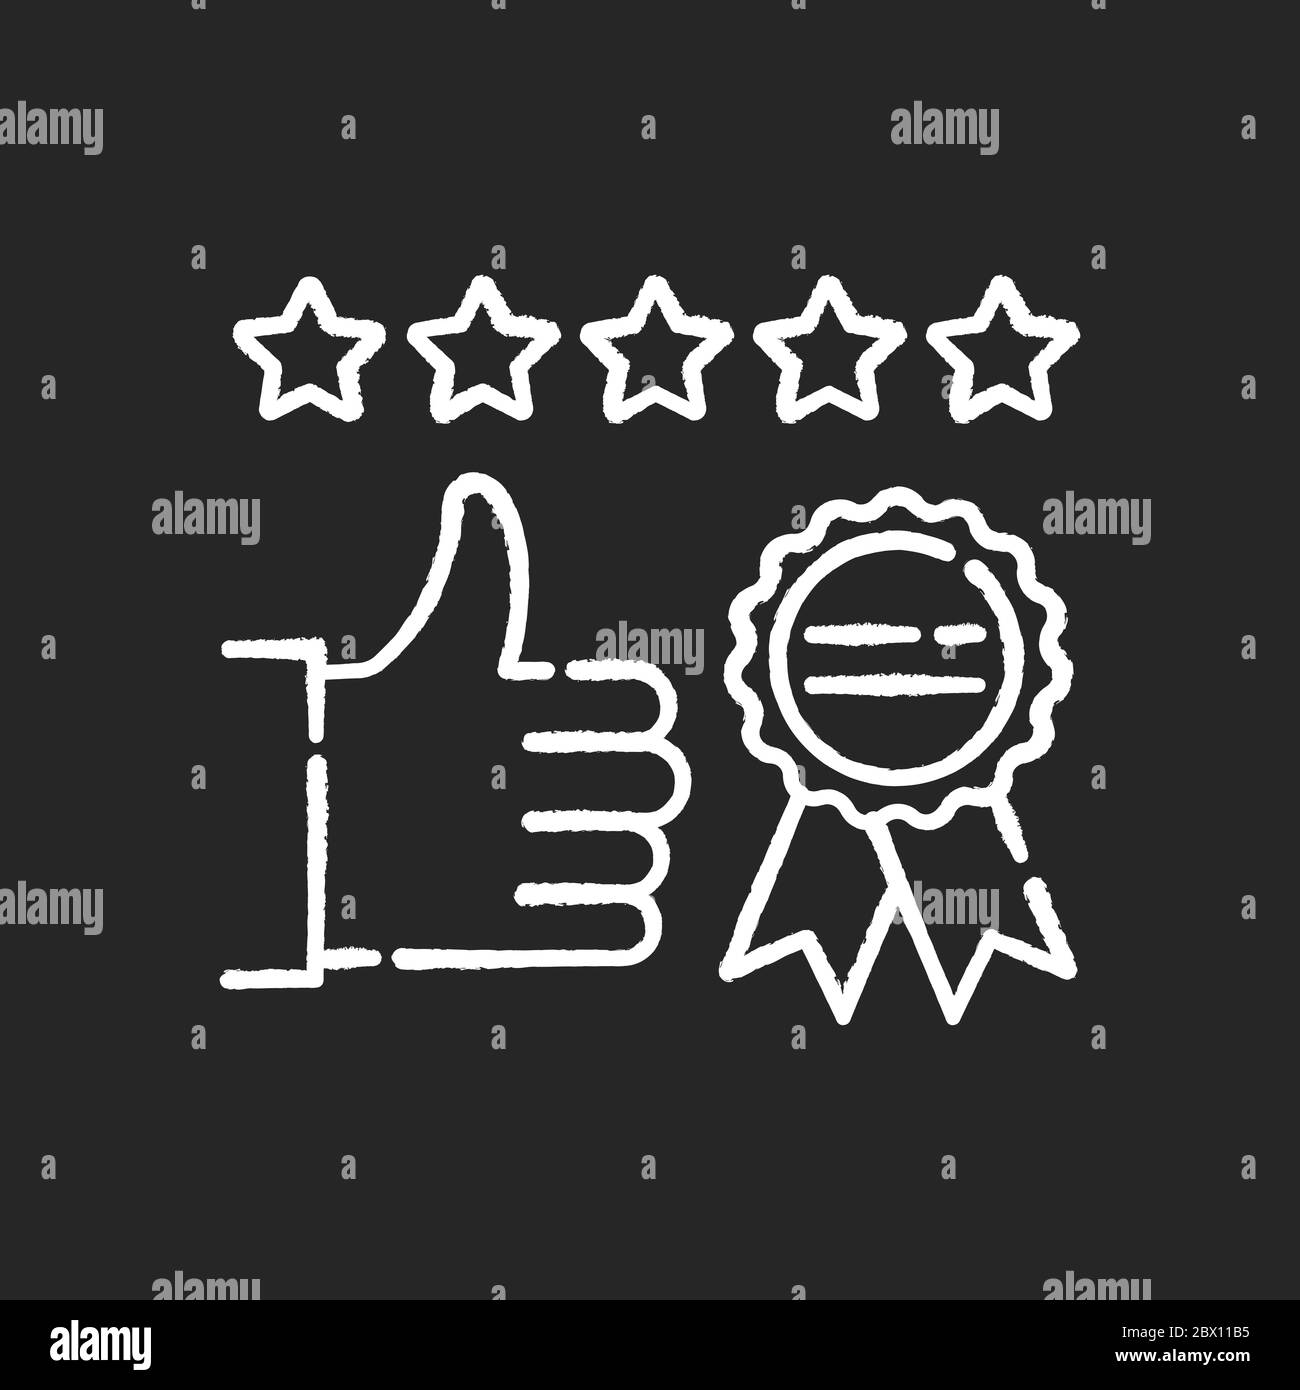 Brand image chalk white icon on black background. Client satisfaction level. Corporate identity. Quality product. Consumer feedback. Best selling labe Stock Vector